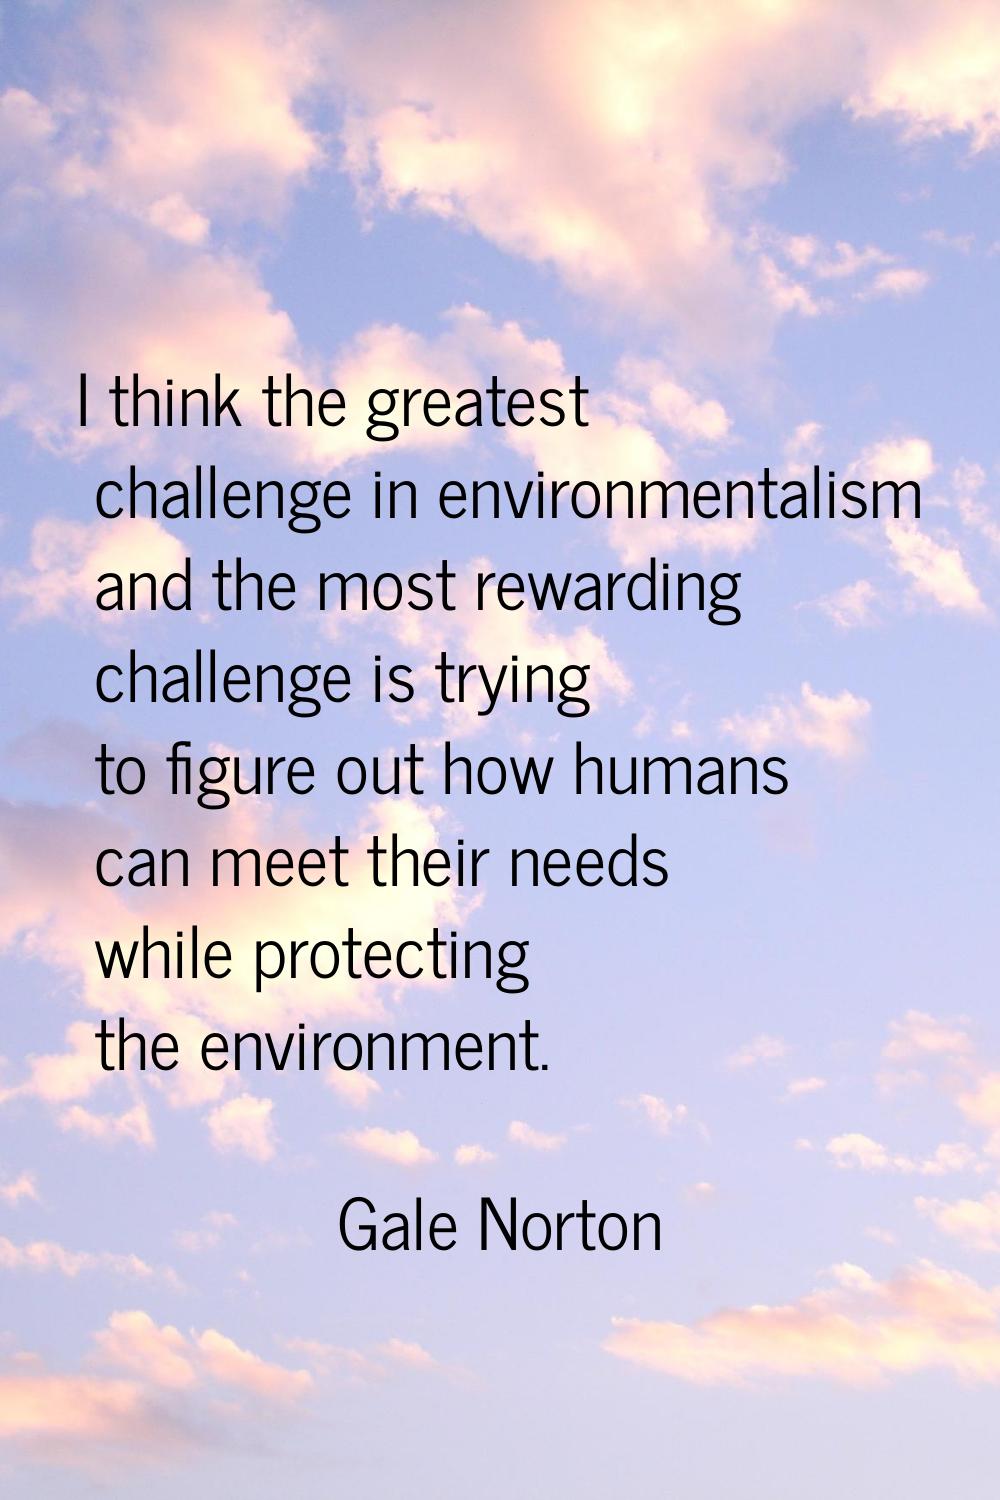 I think the greatest challenge in environmentalism and the most rewarding challenge is trying to fi